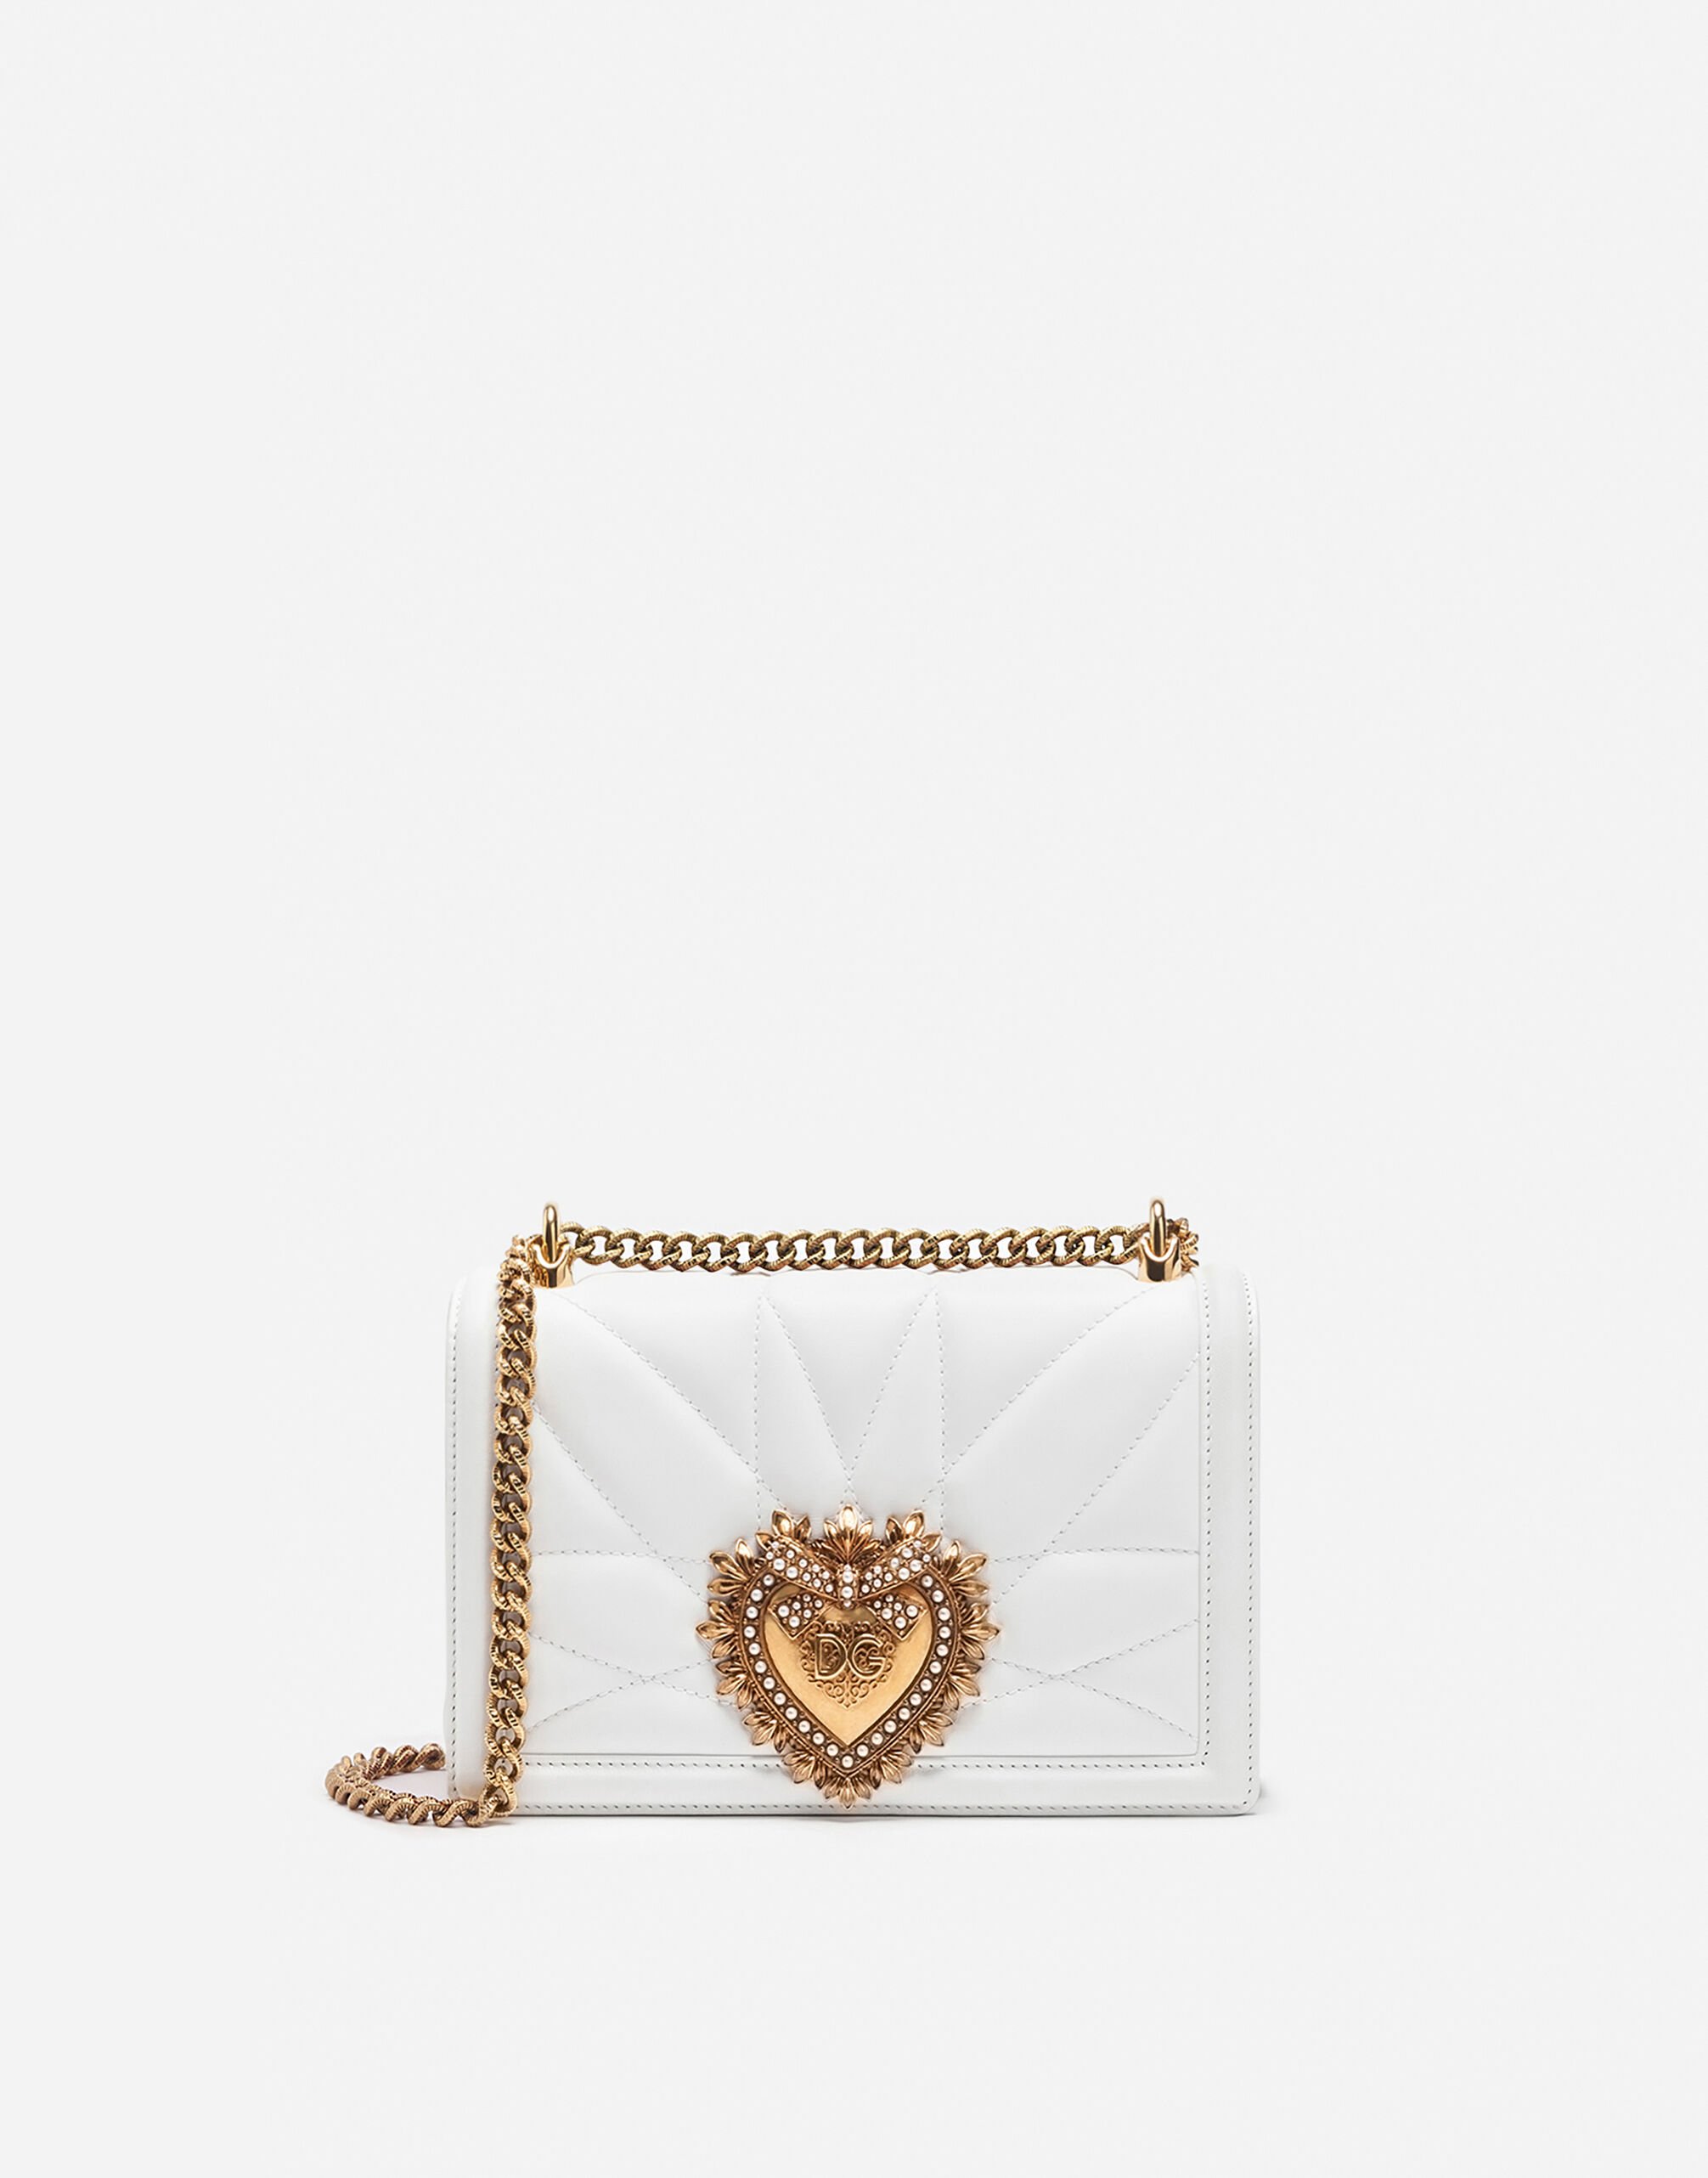 Dolce & Gabbana Medium Devotion crossbody bag in quilted nappa leather White BB7100AW437